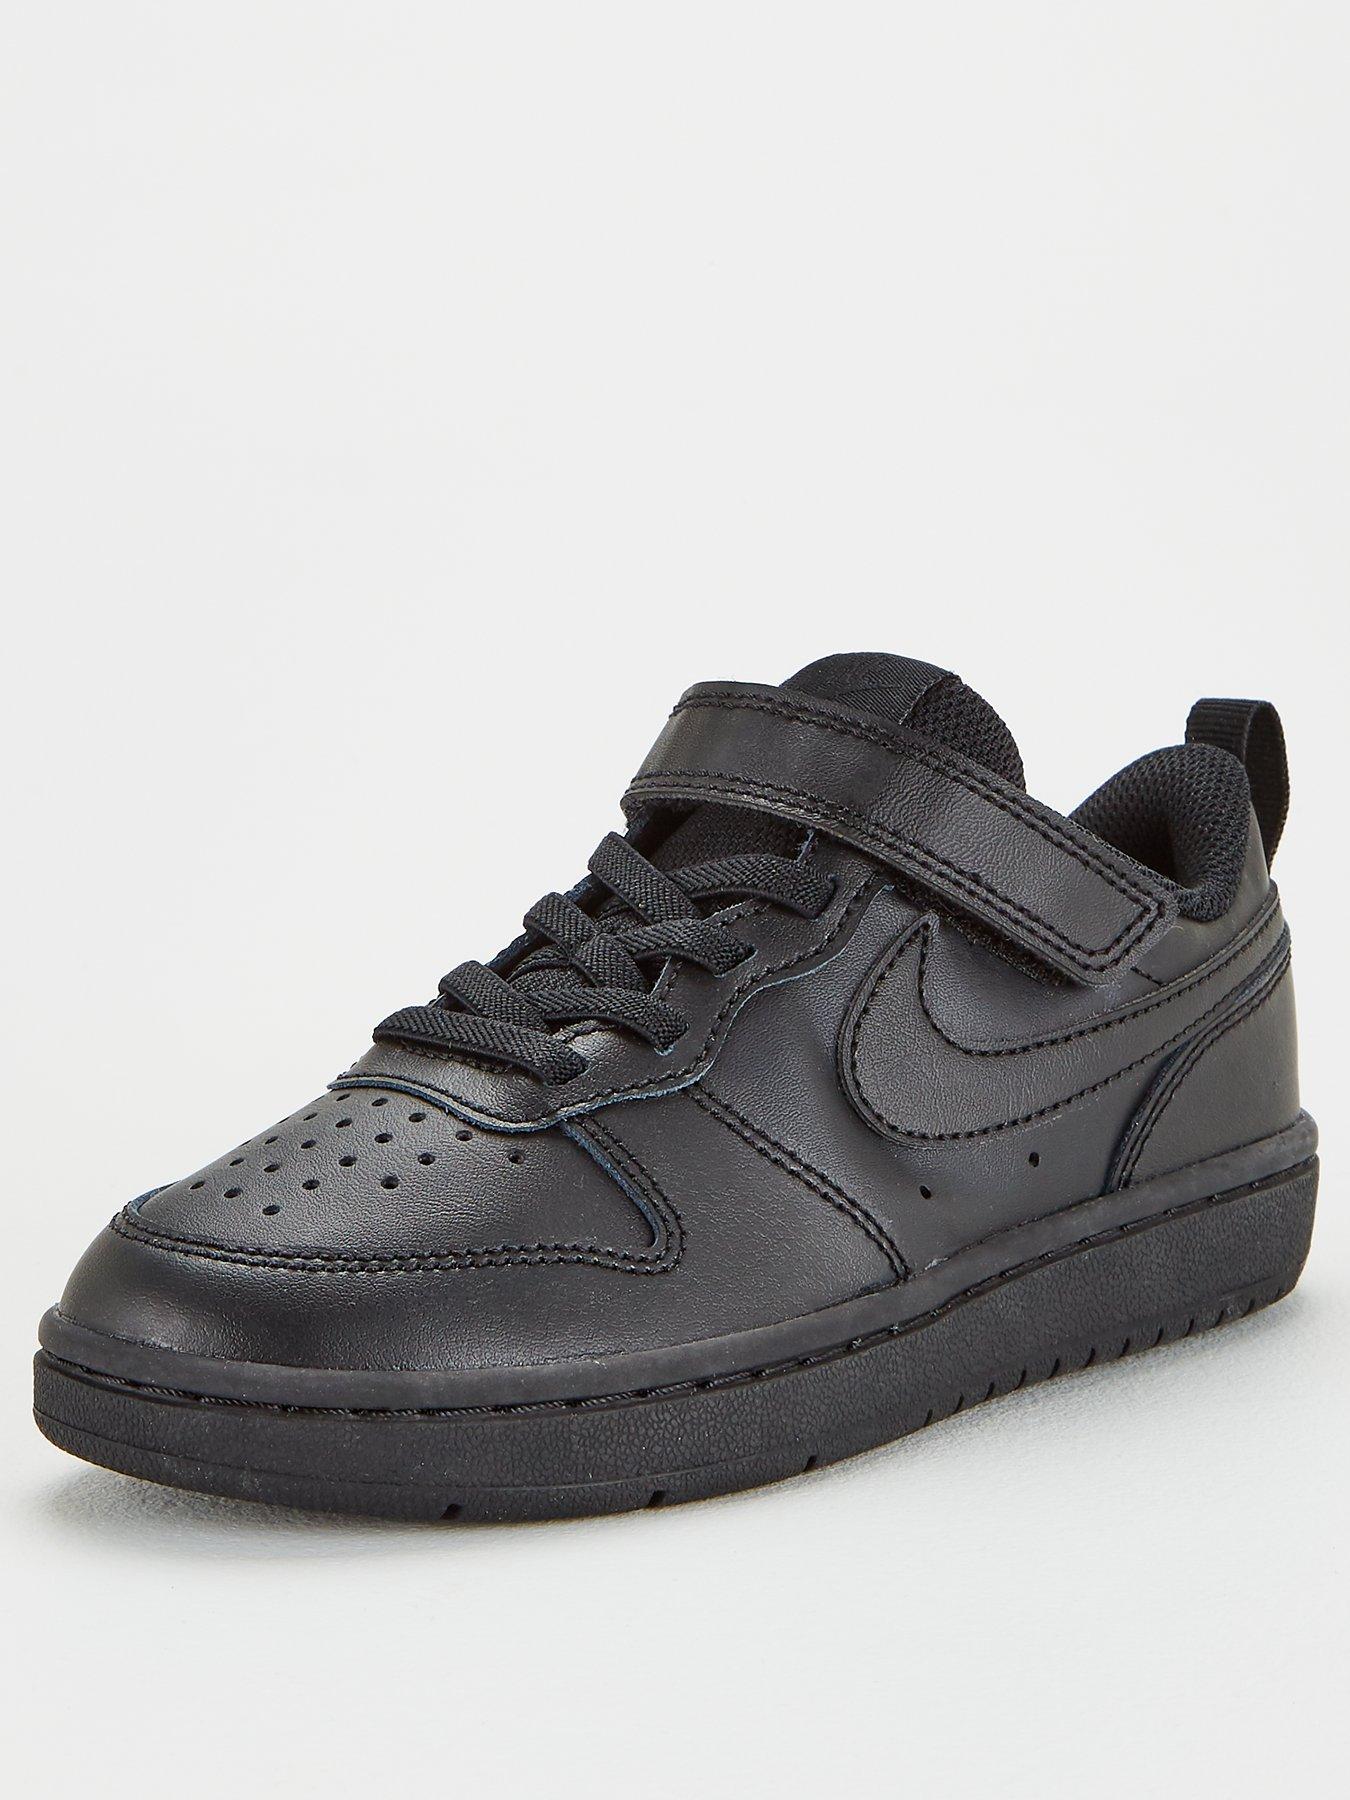 Nike Court Borough Low 2 Childrens Trainers - Black | littlewoods.com